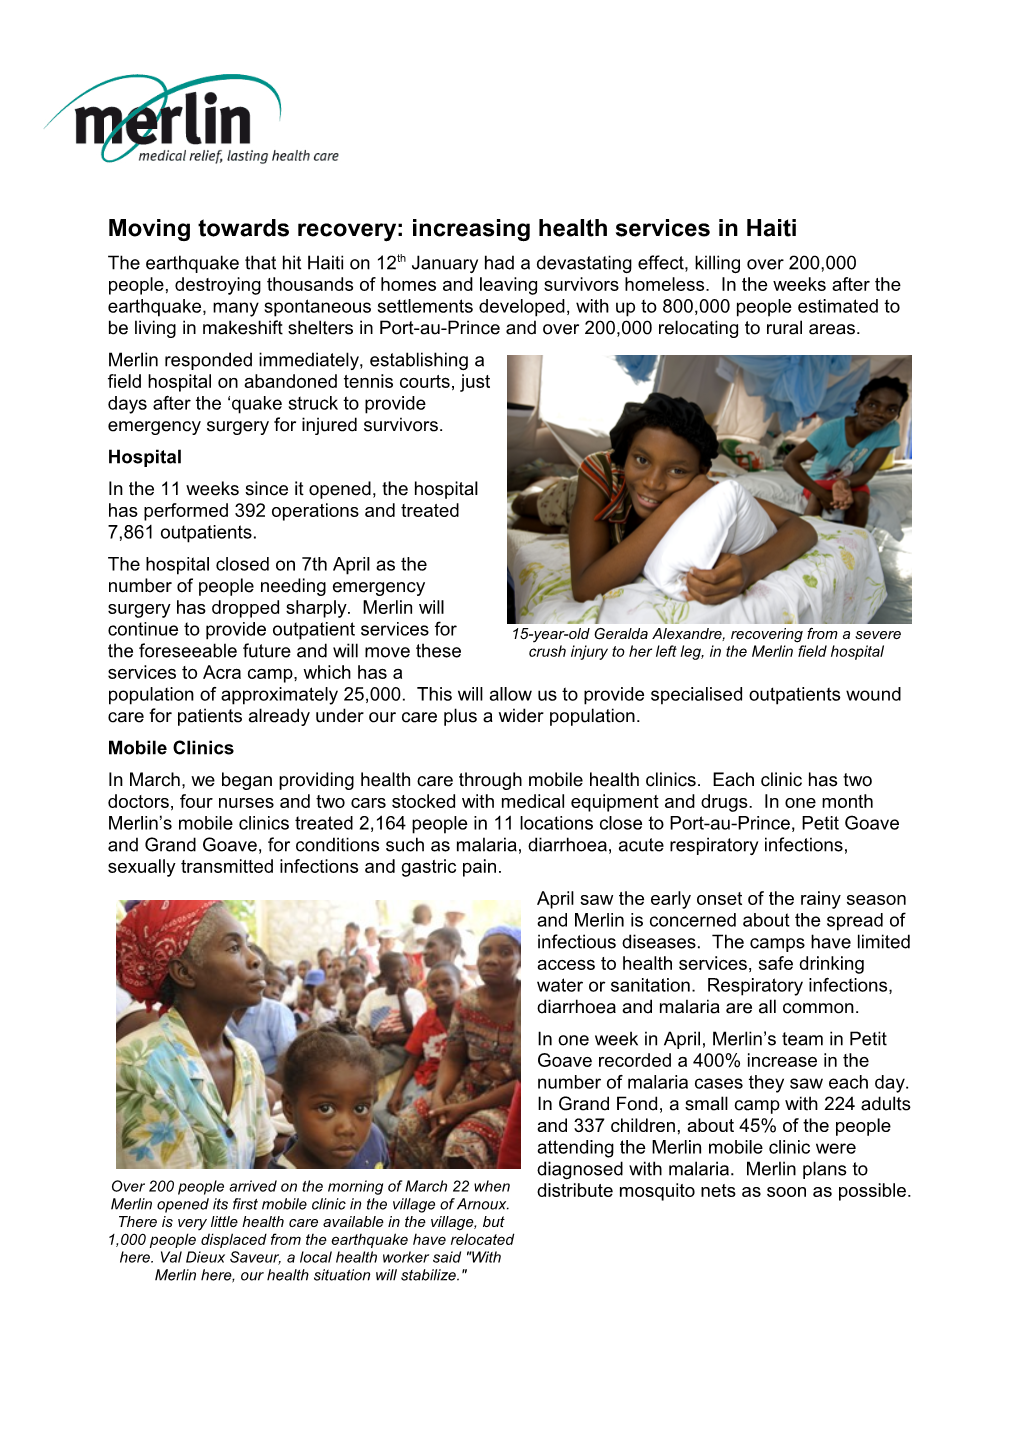 Moving Towards Recovery: Increasing Health Services in Haiti